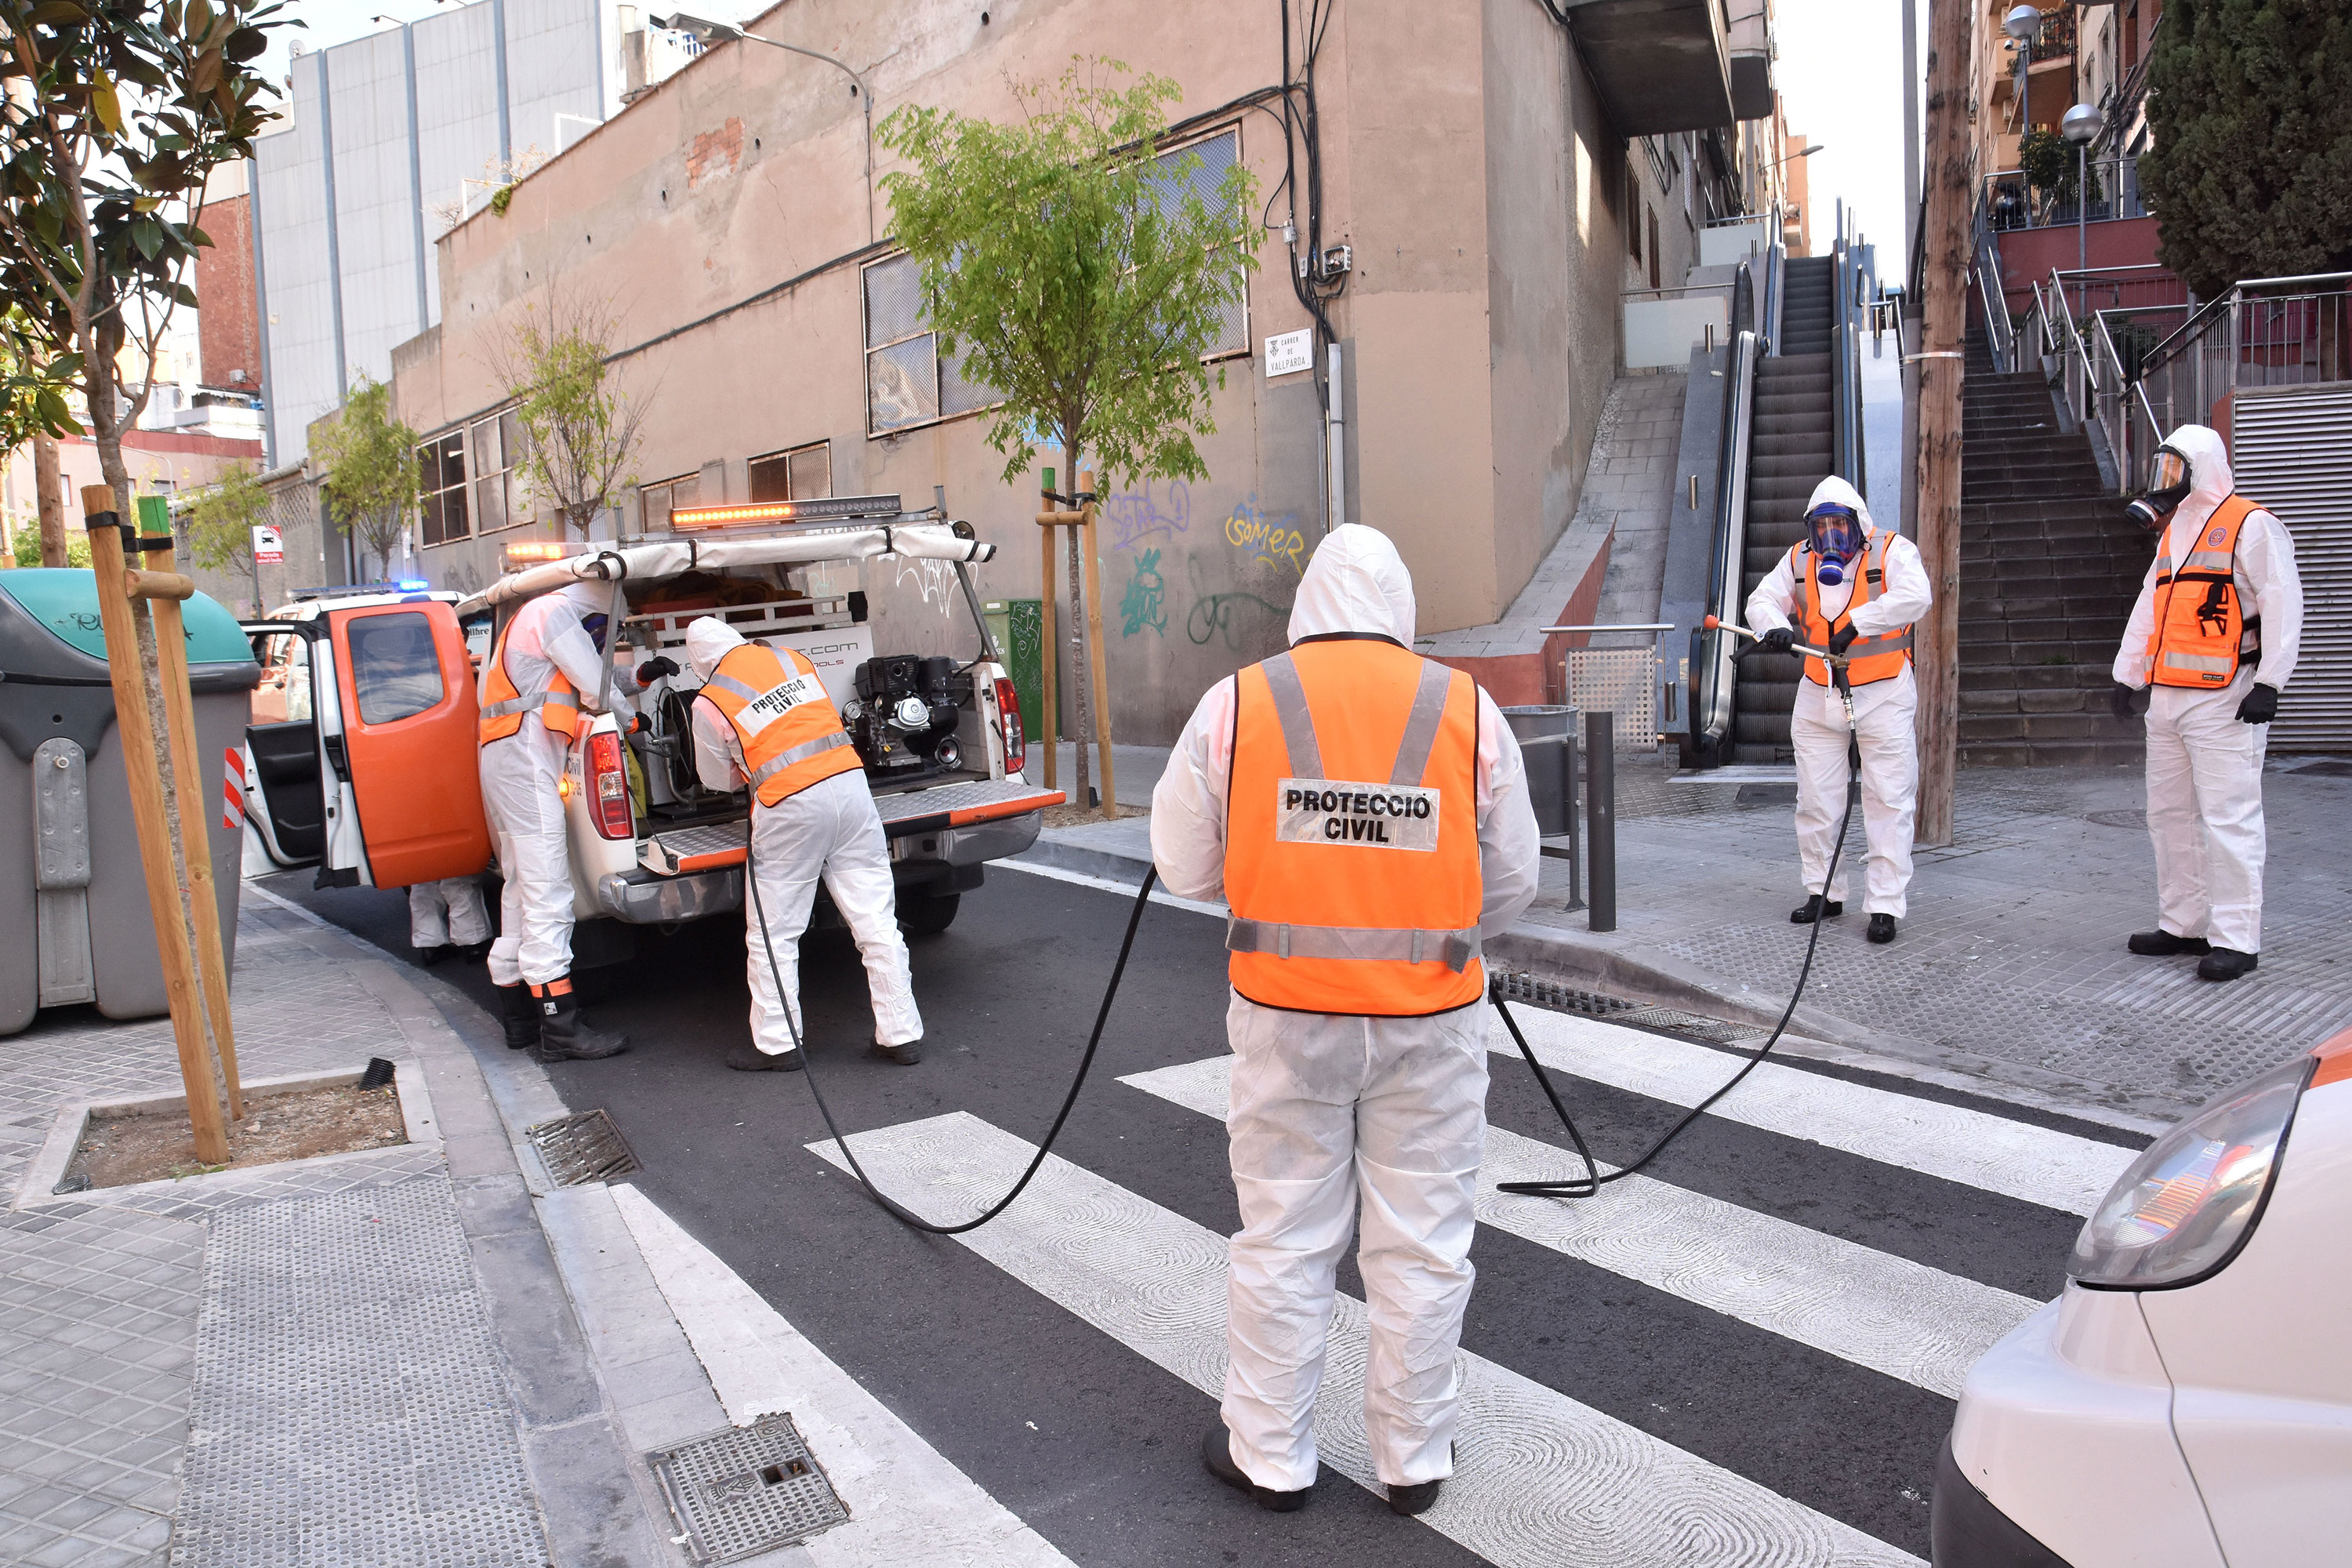 A group of civil protection volunteers from disinfects a street in L´Hospitalet, Spain, on March 27.